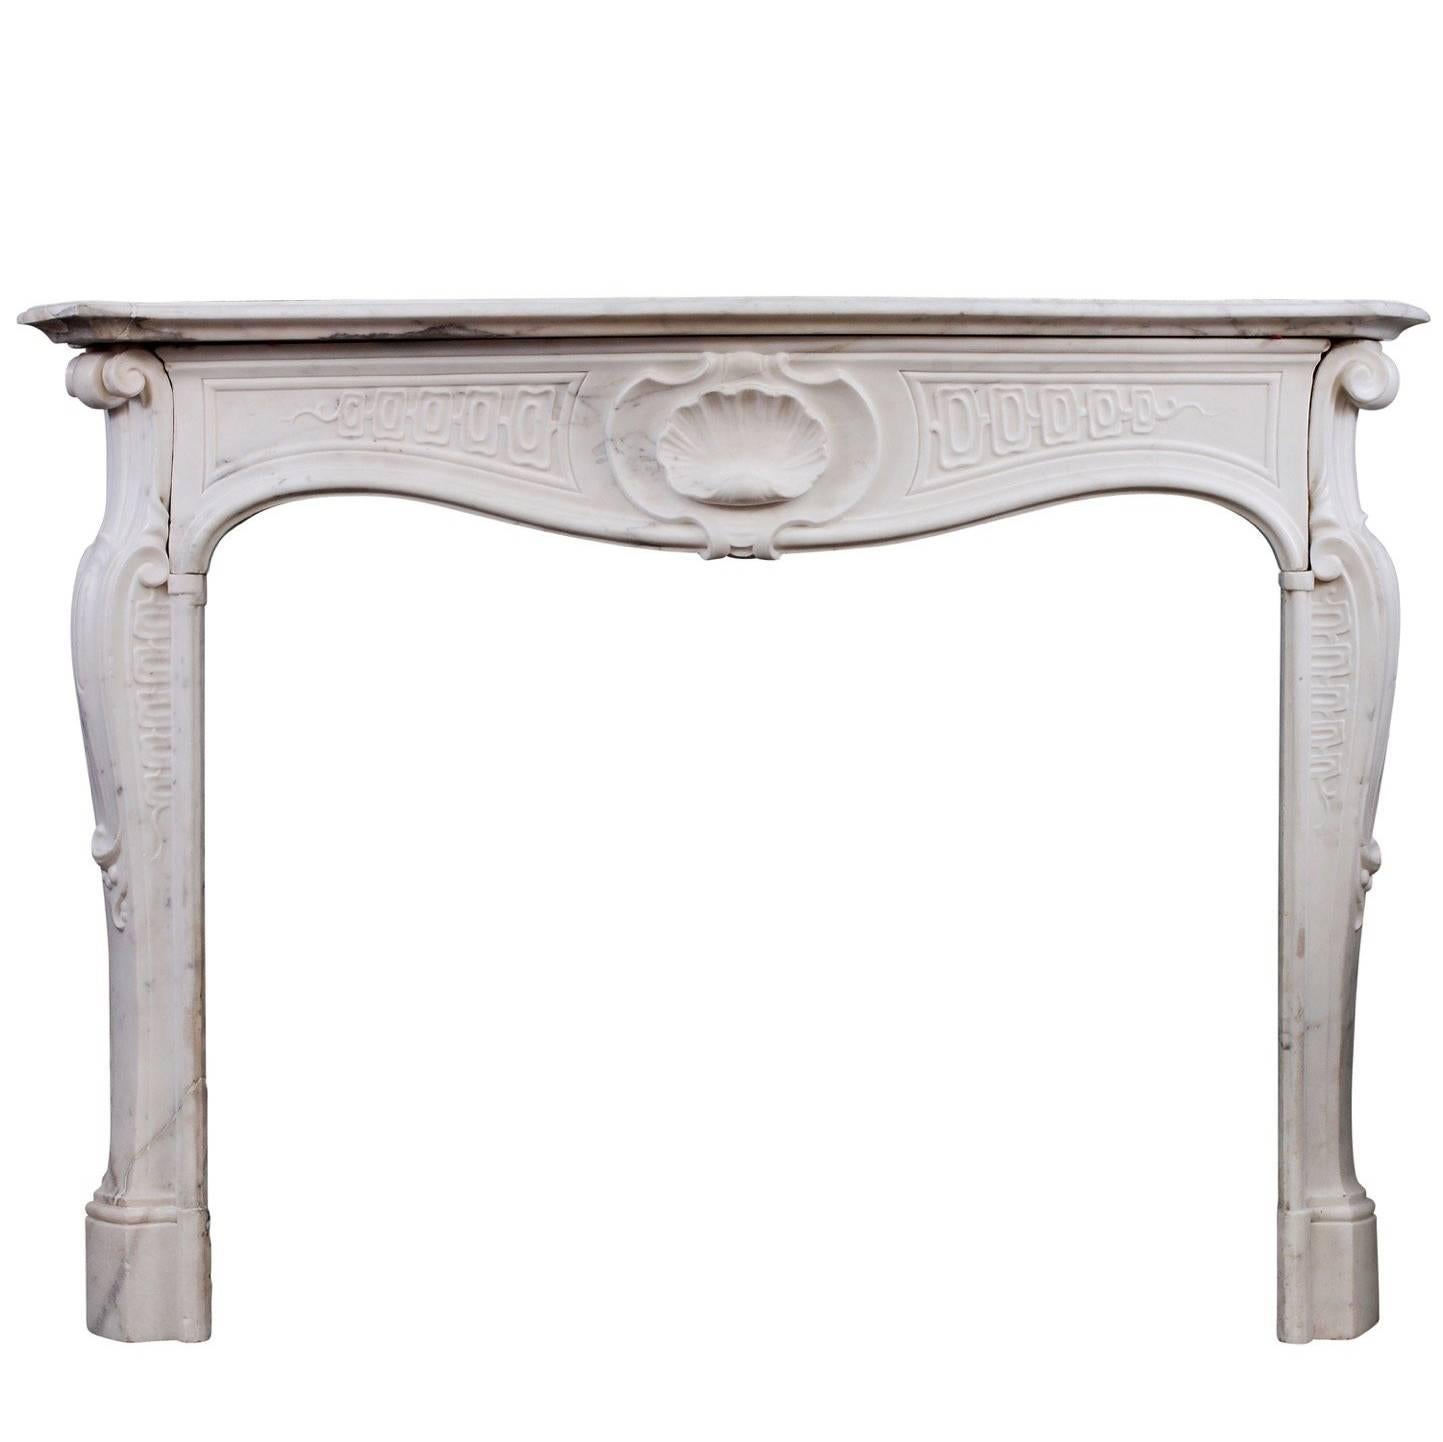 Quality 18th Century Antique Italian Fireplace in Statuary Marble